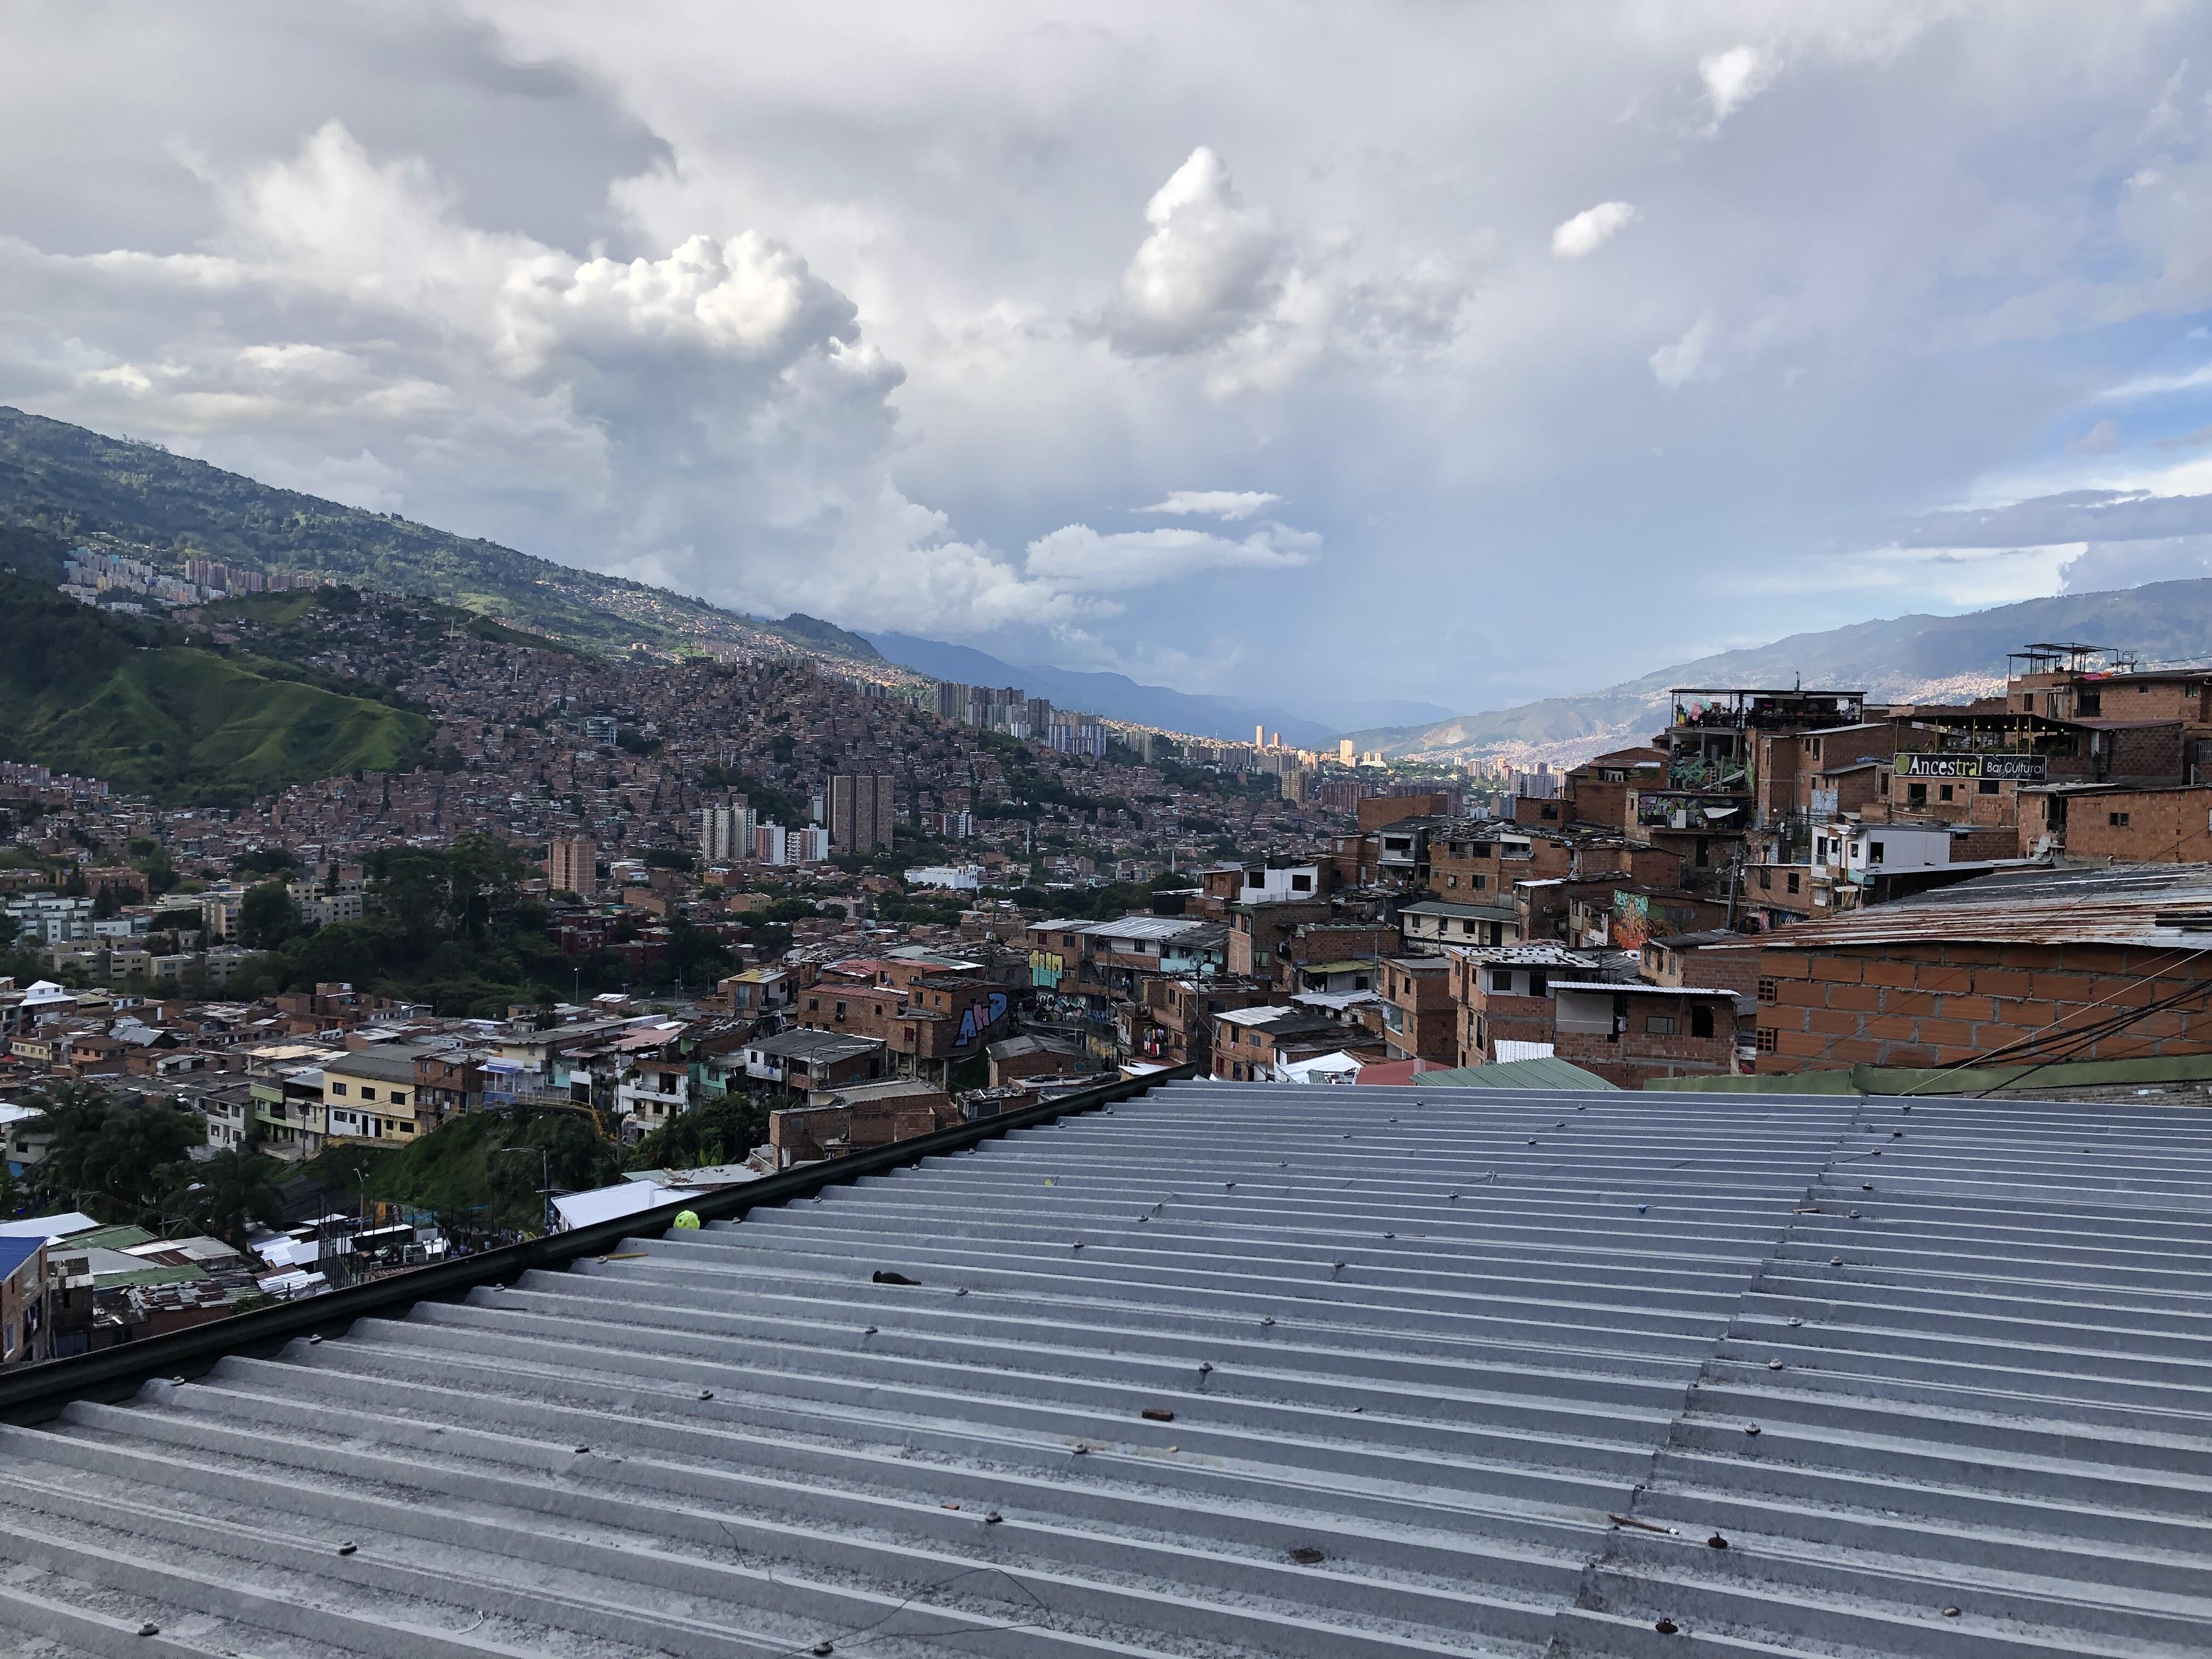 Rooftop view overlooking Medellin, a mountain city in Colombia